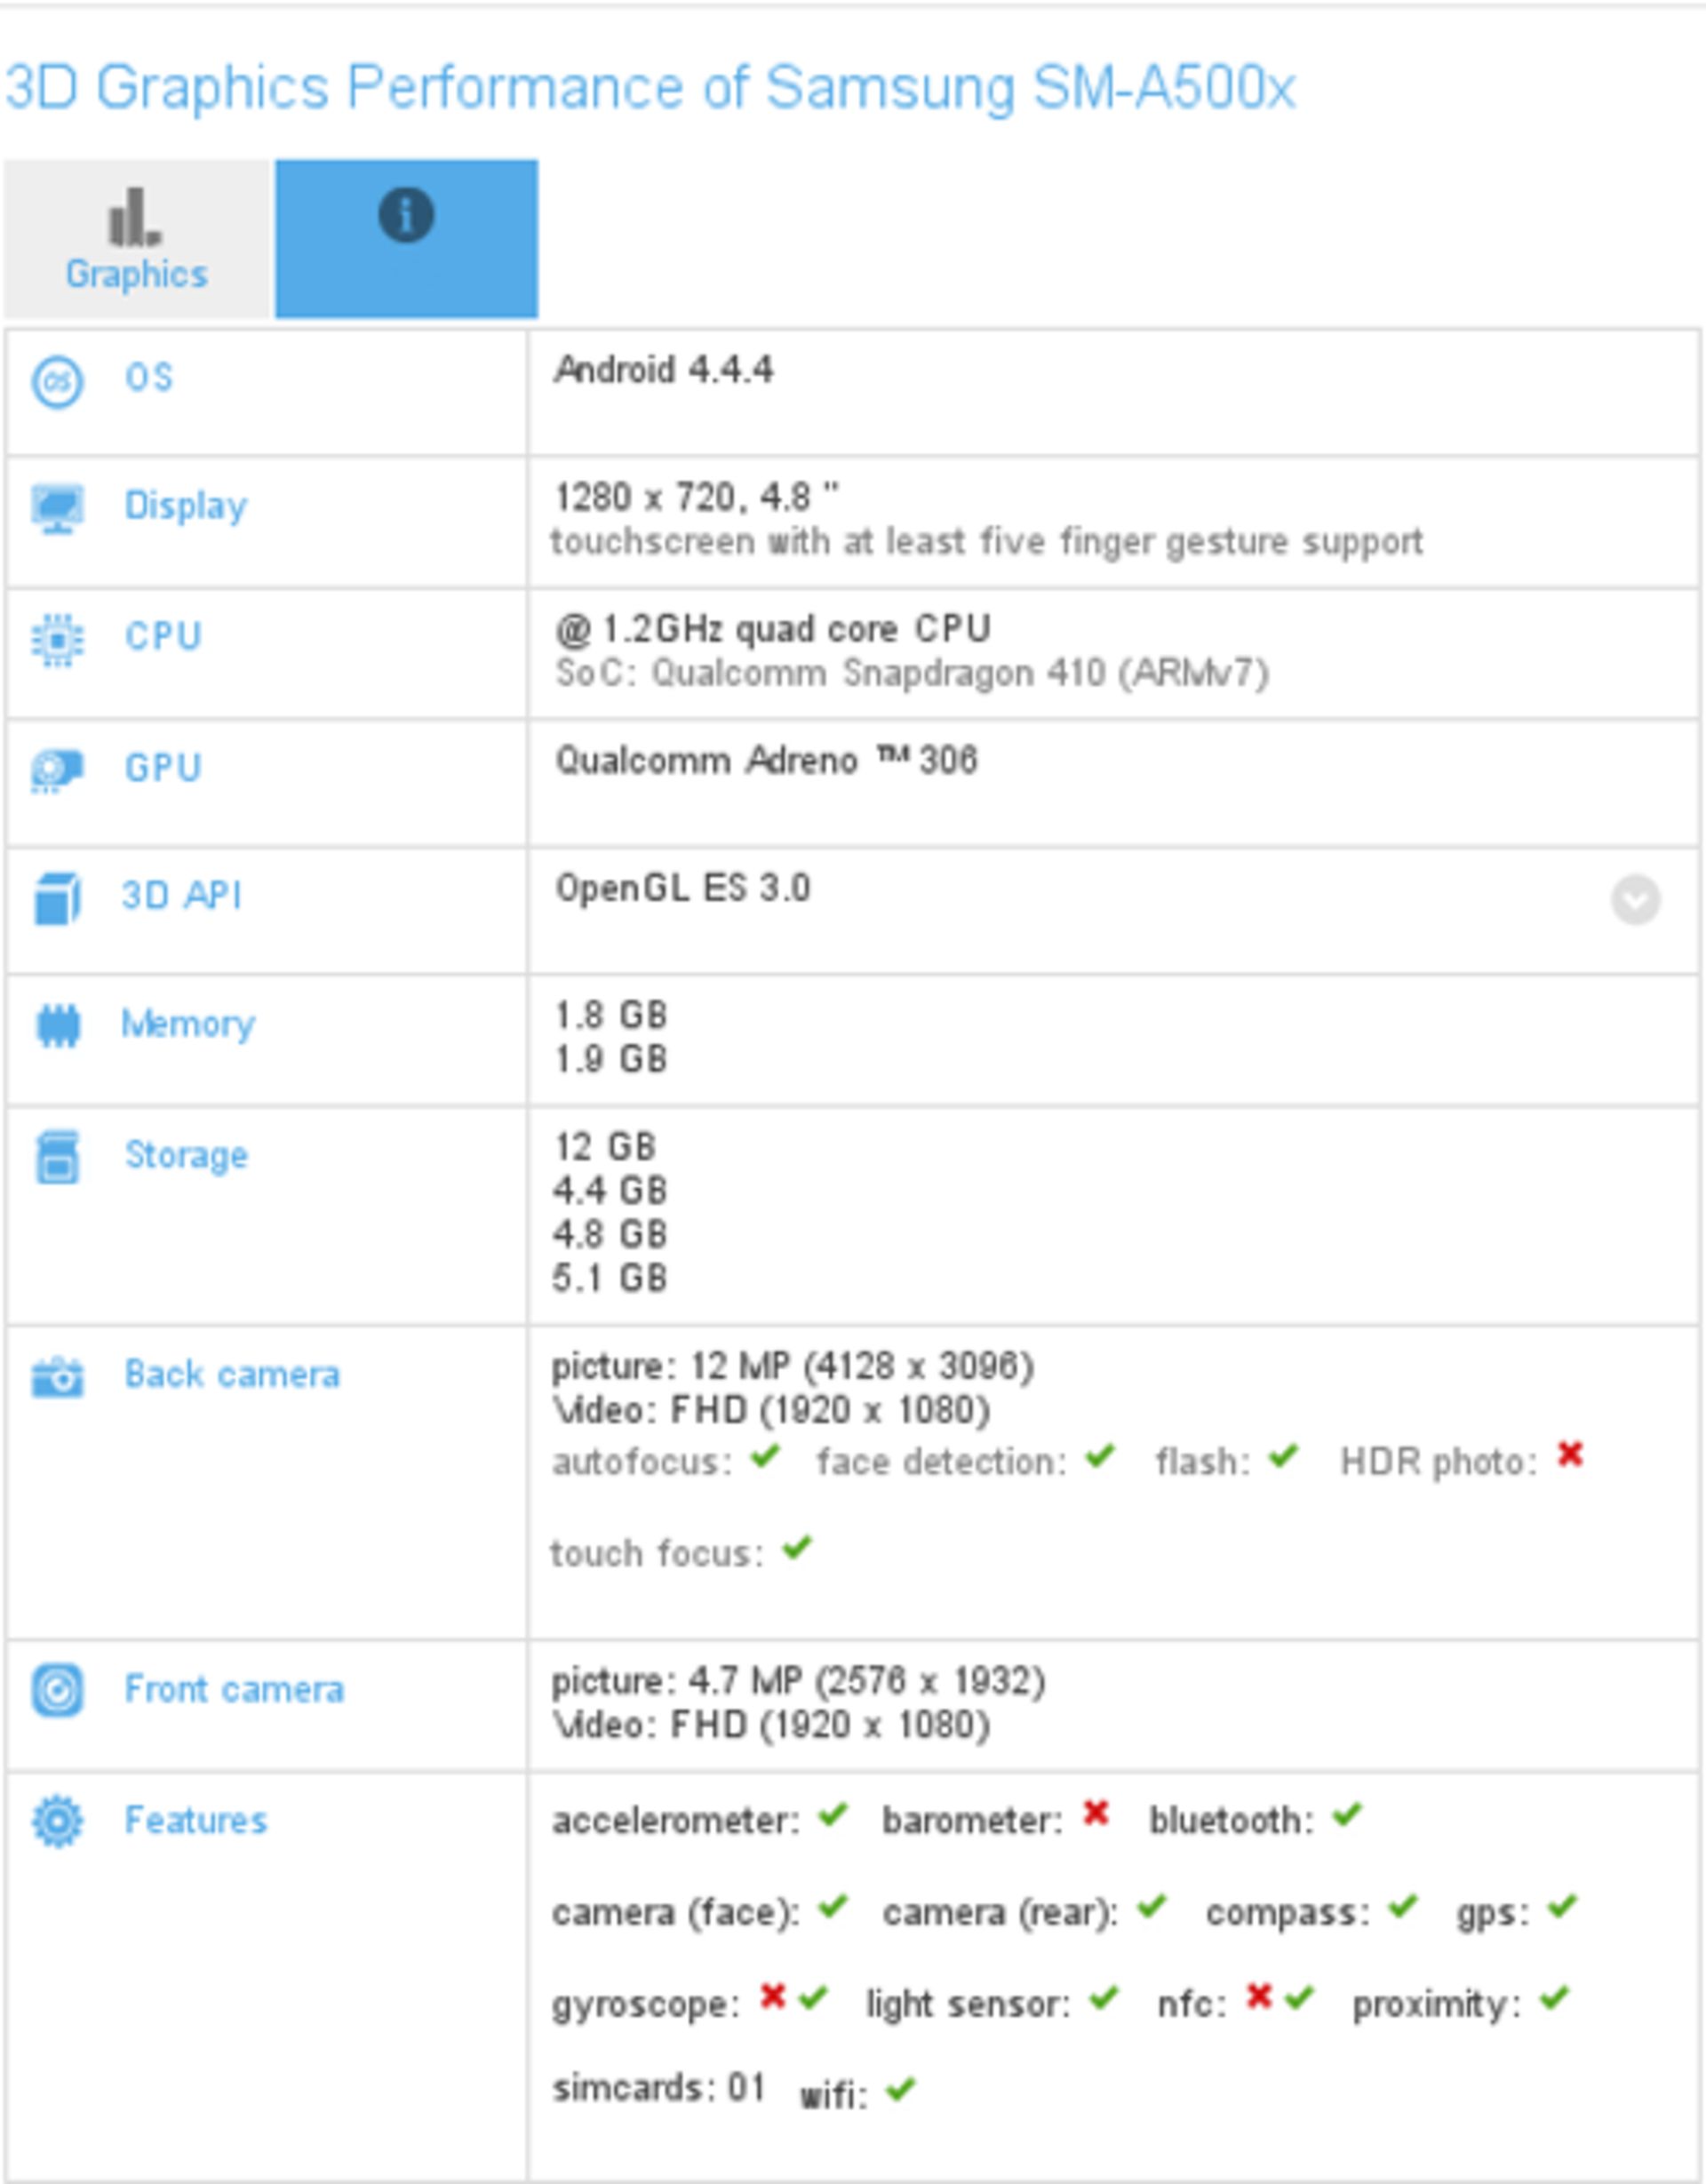 Galaxy A5 gets benchmarked